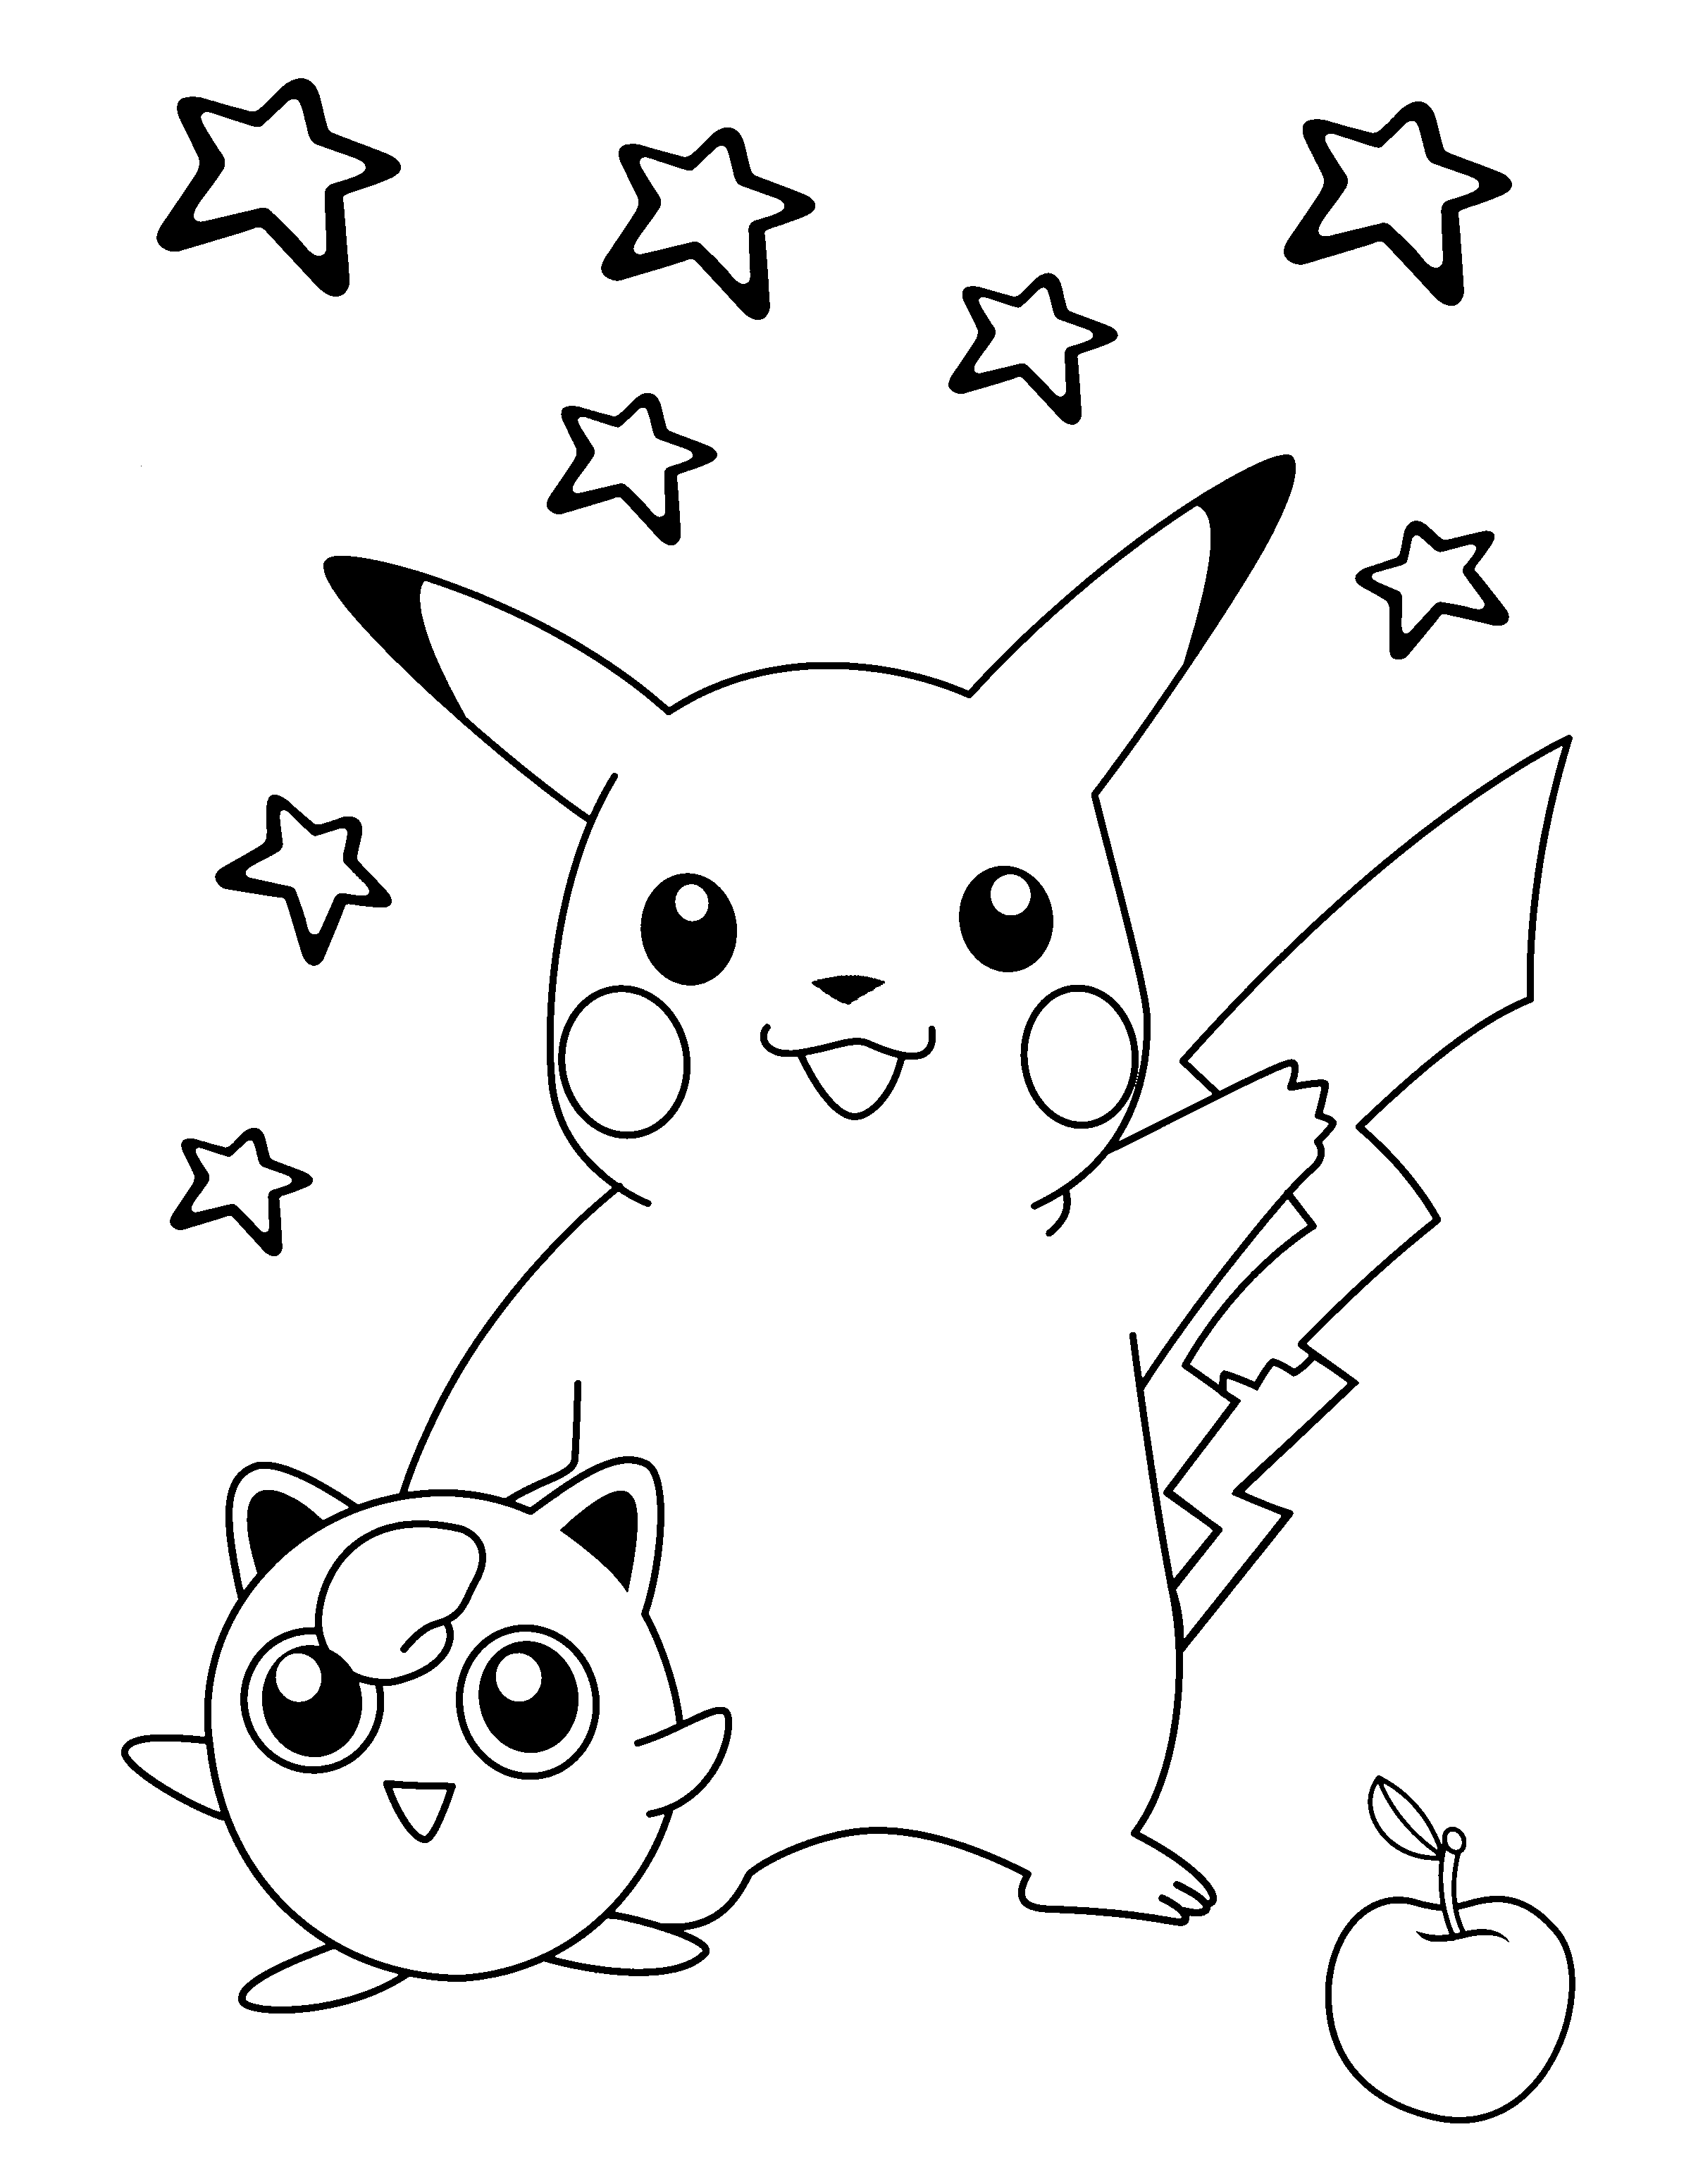 Pokemon to download for free - All Pokemon coloring pages Kids Coloring